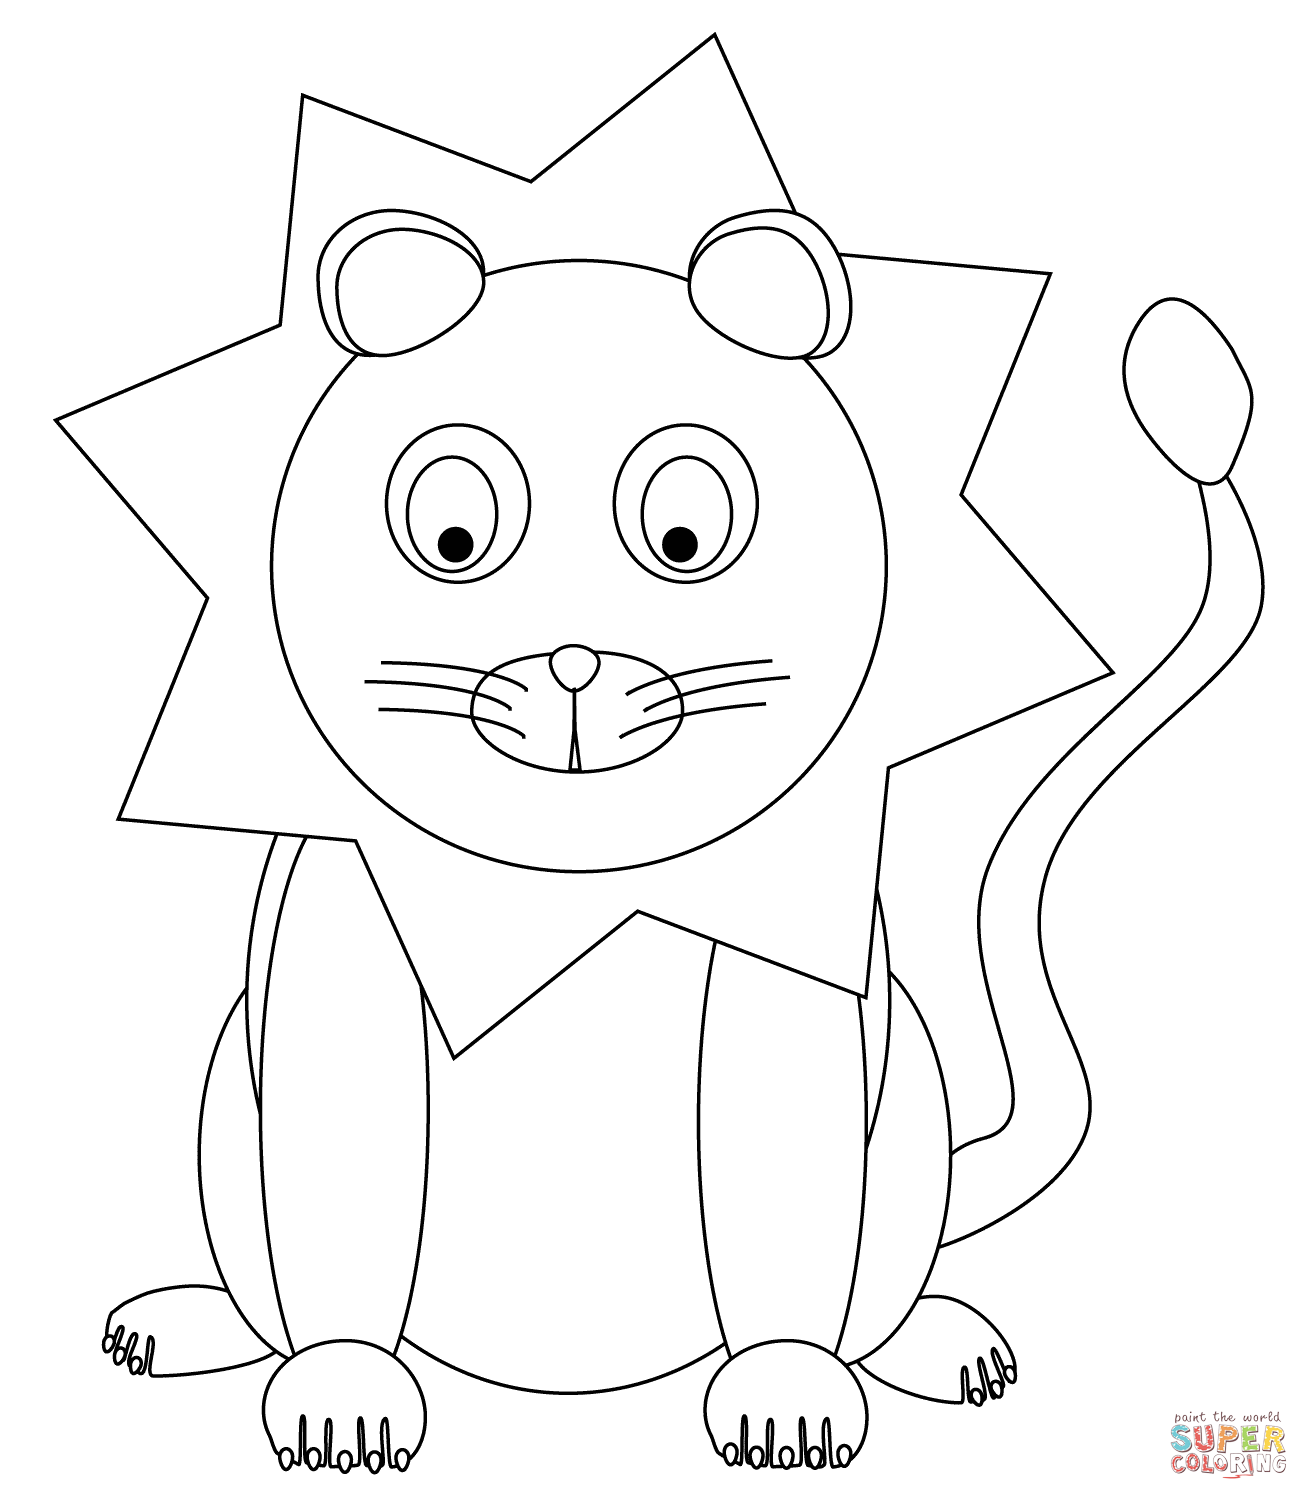 Coloring Pages For Pride - Coloring Home